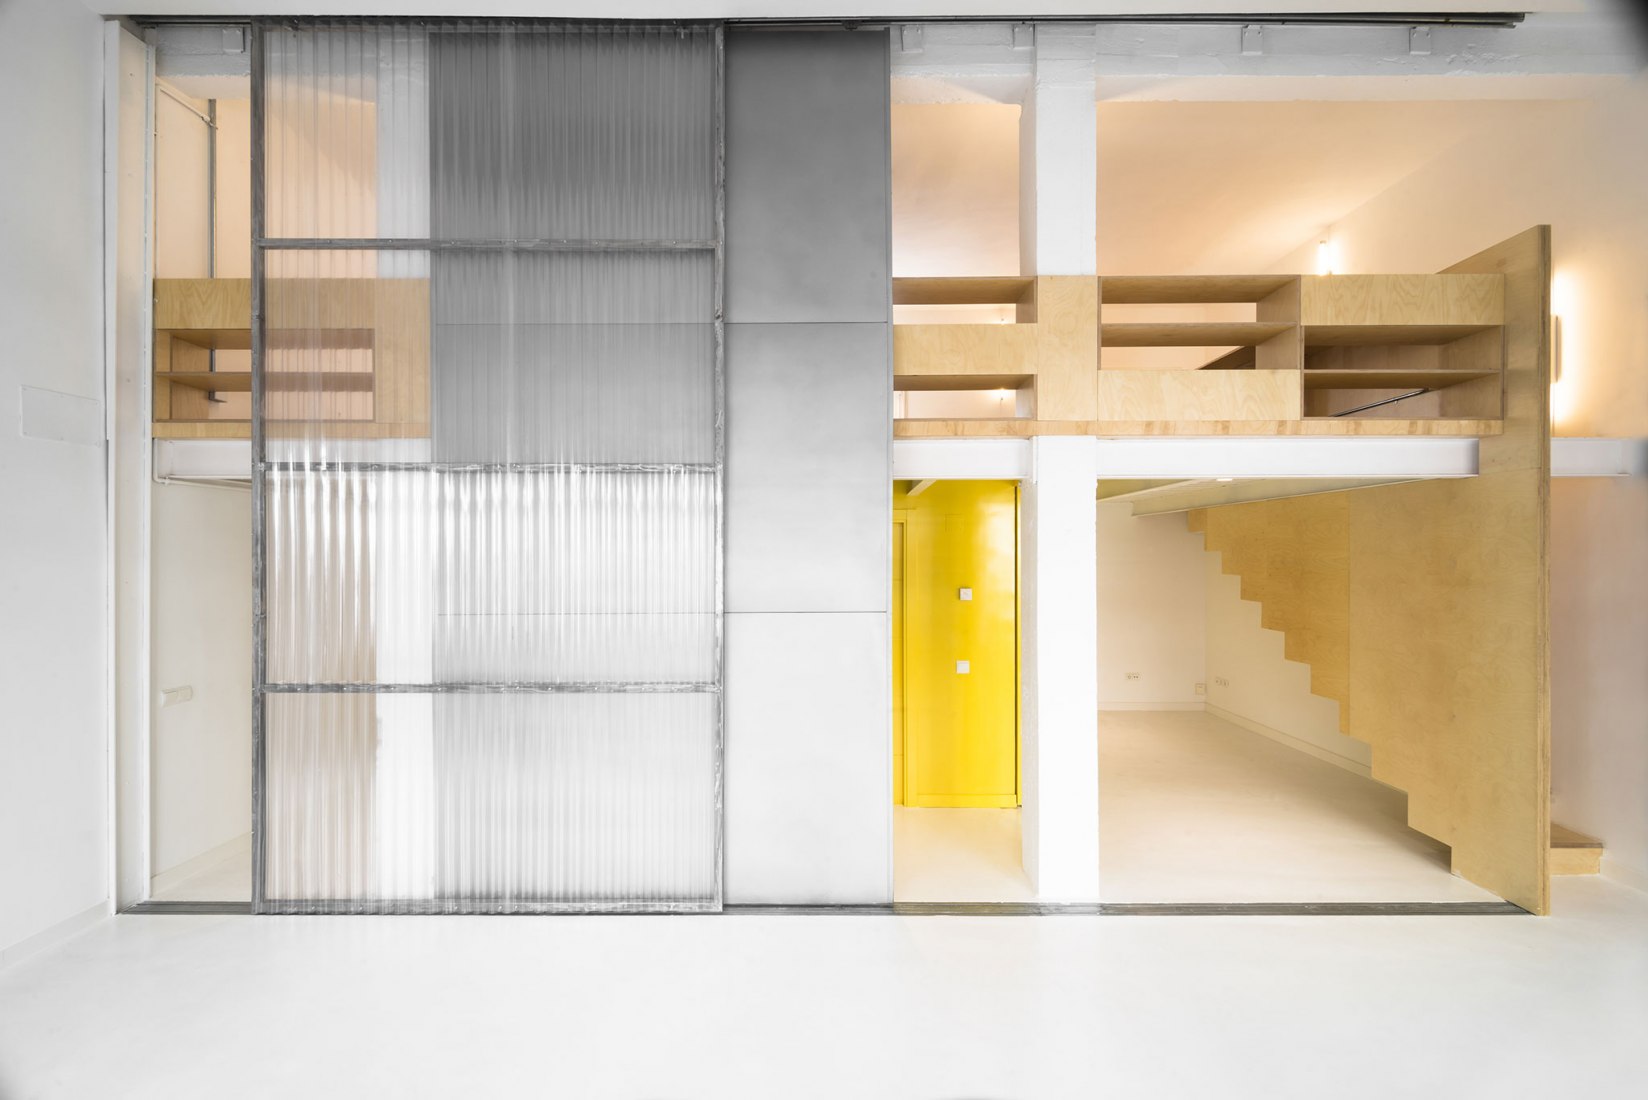 MULTIPLYING ARCHITECTURES (II). Loft Renovation by Idearch. Courtesy of the architects